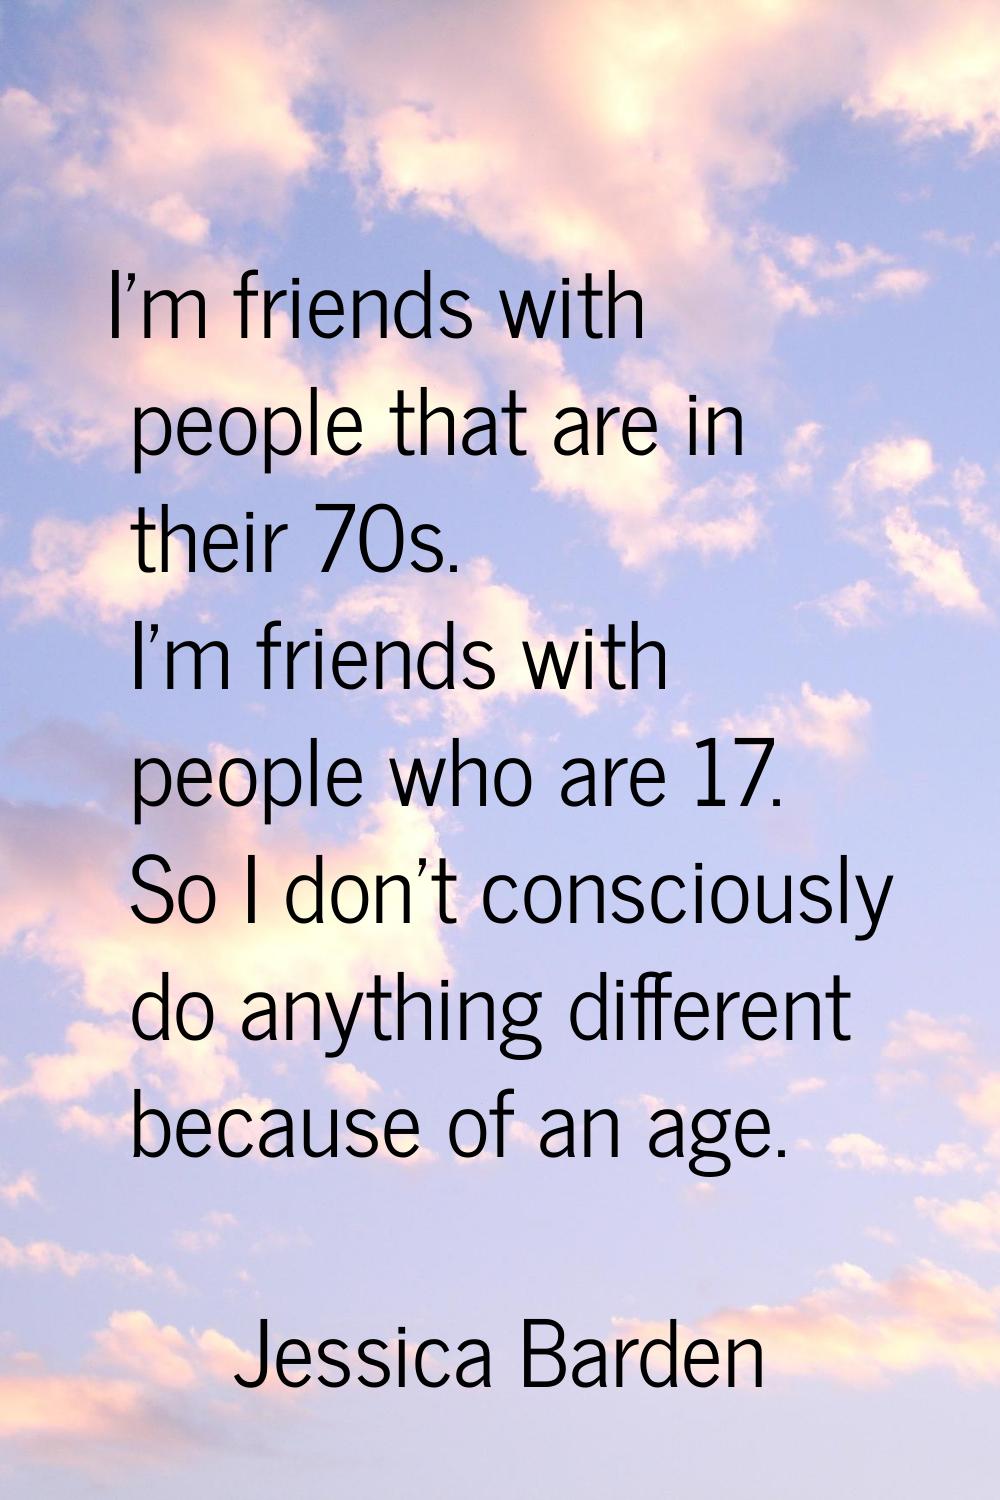 I’m friends with people that are in their 70s. I’m friends with people who are 17. So I don’t consc